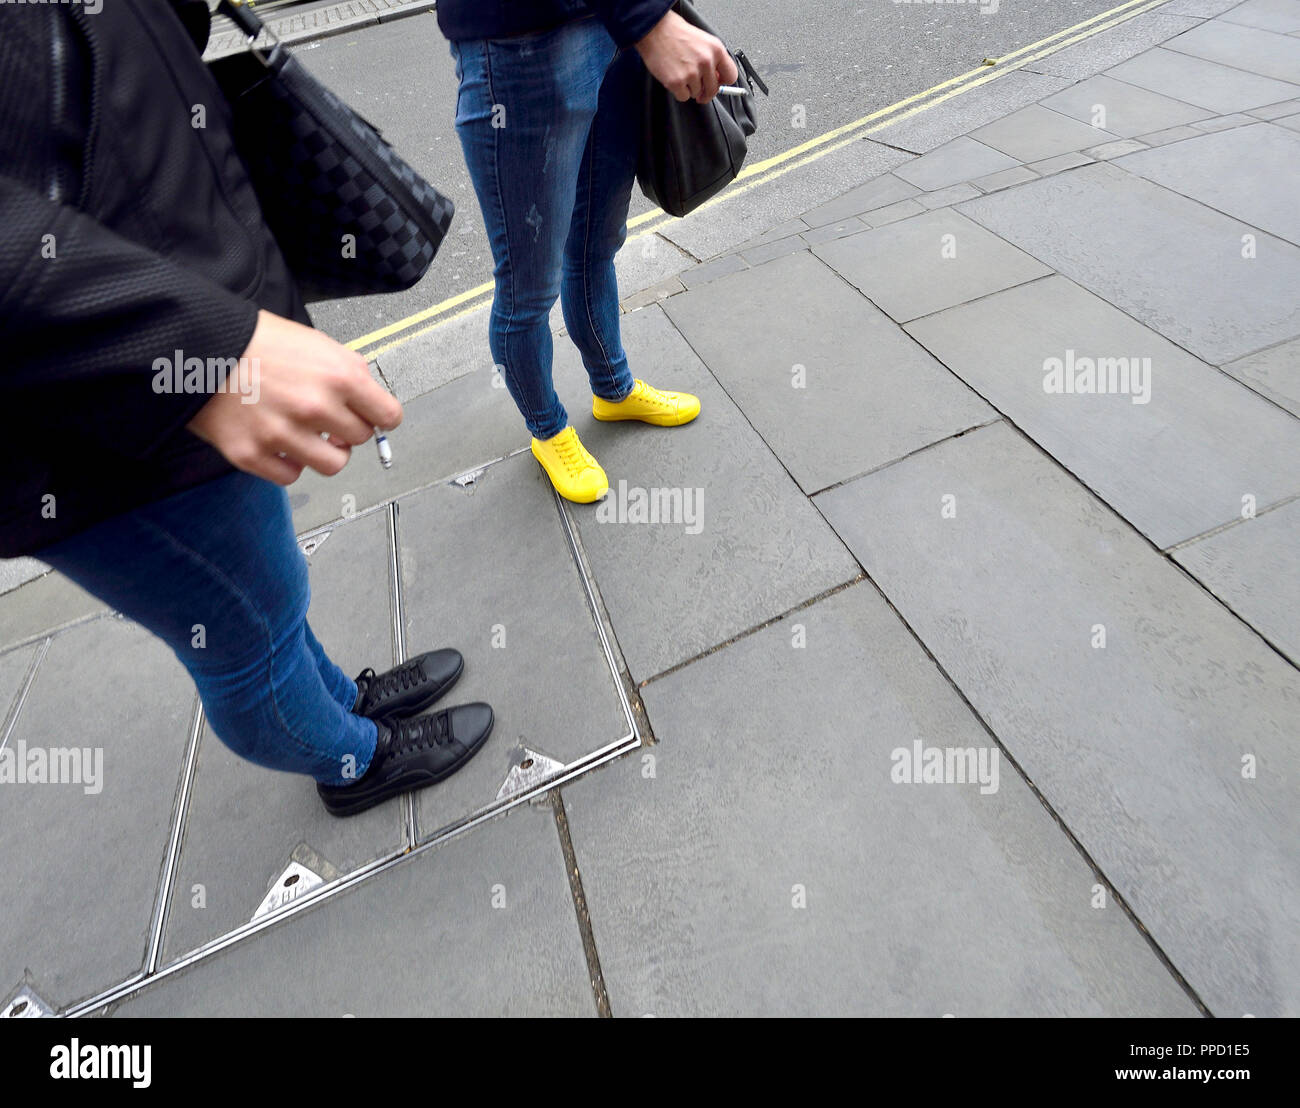 Two women smoking, one with yellow shoes, London, England, UK. Stock Photo